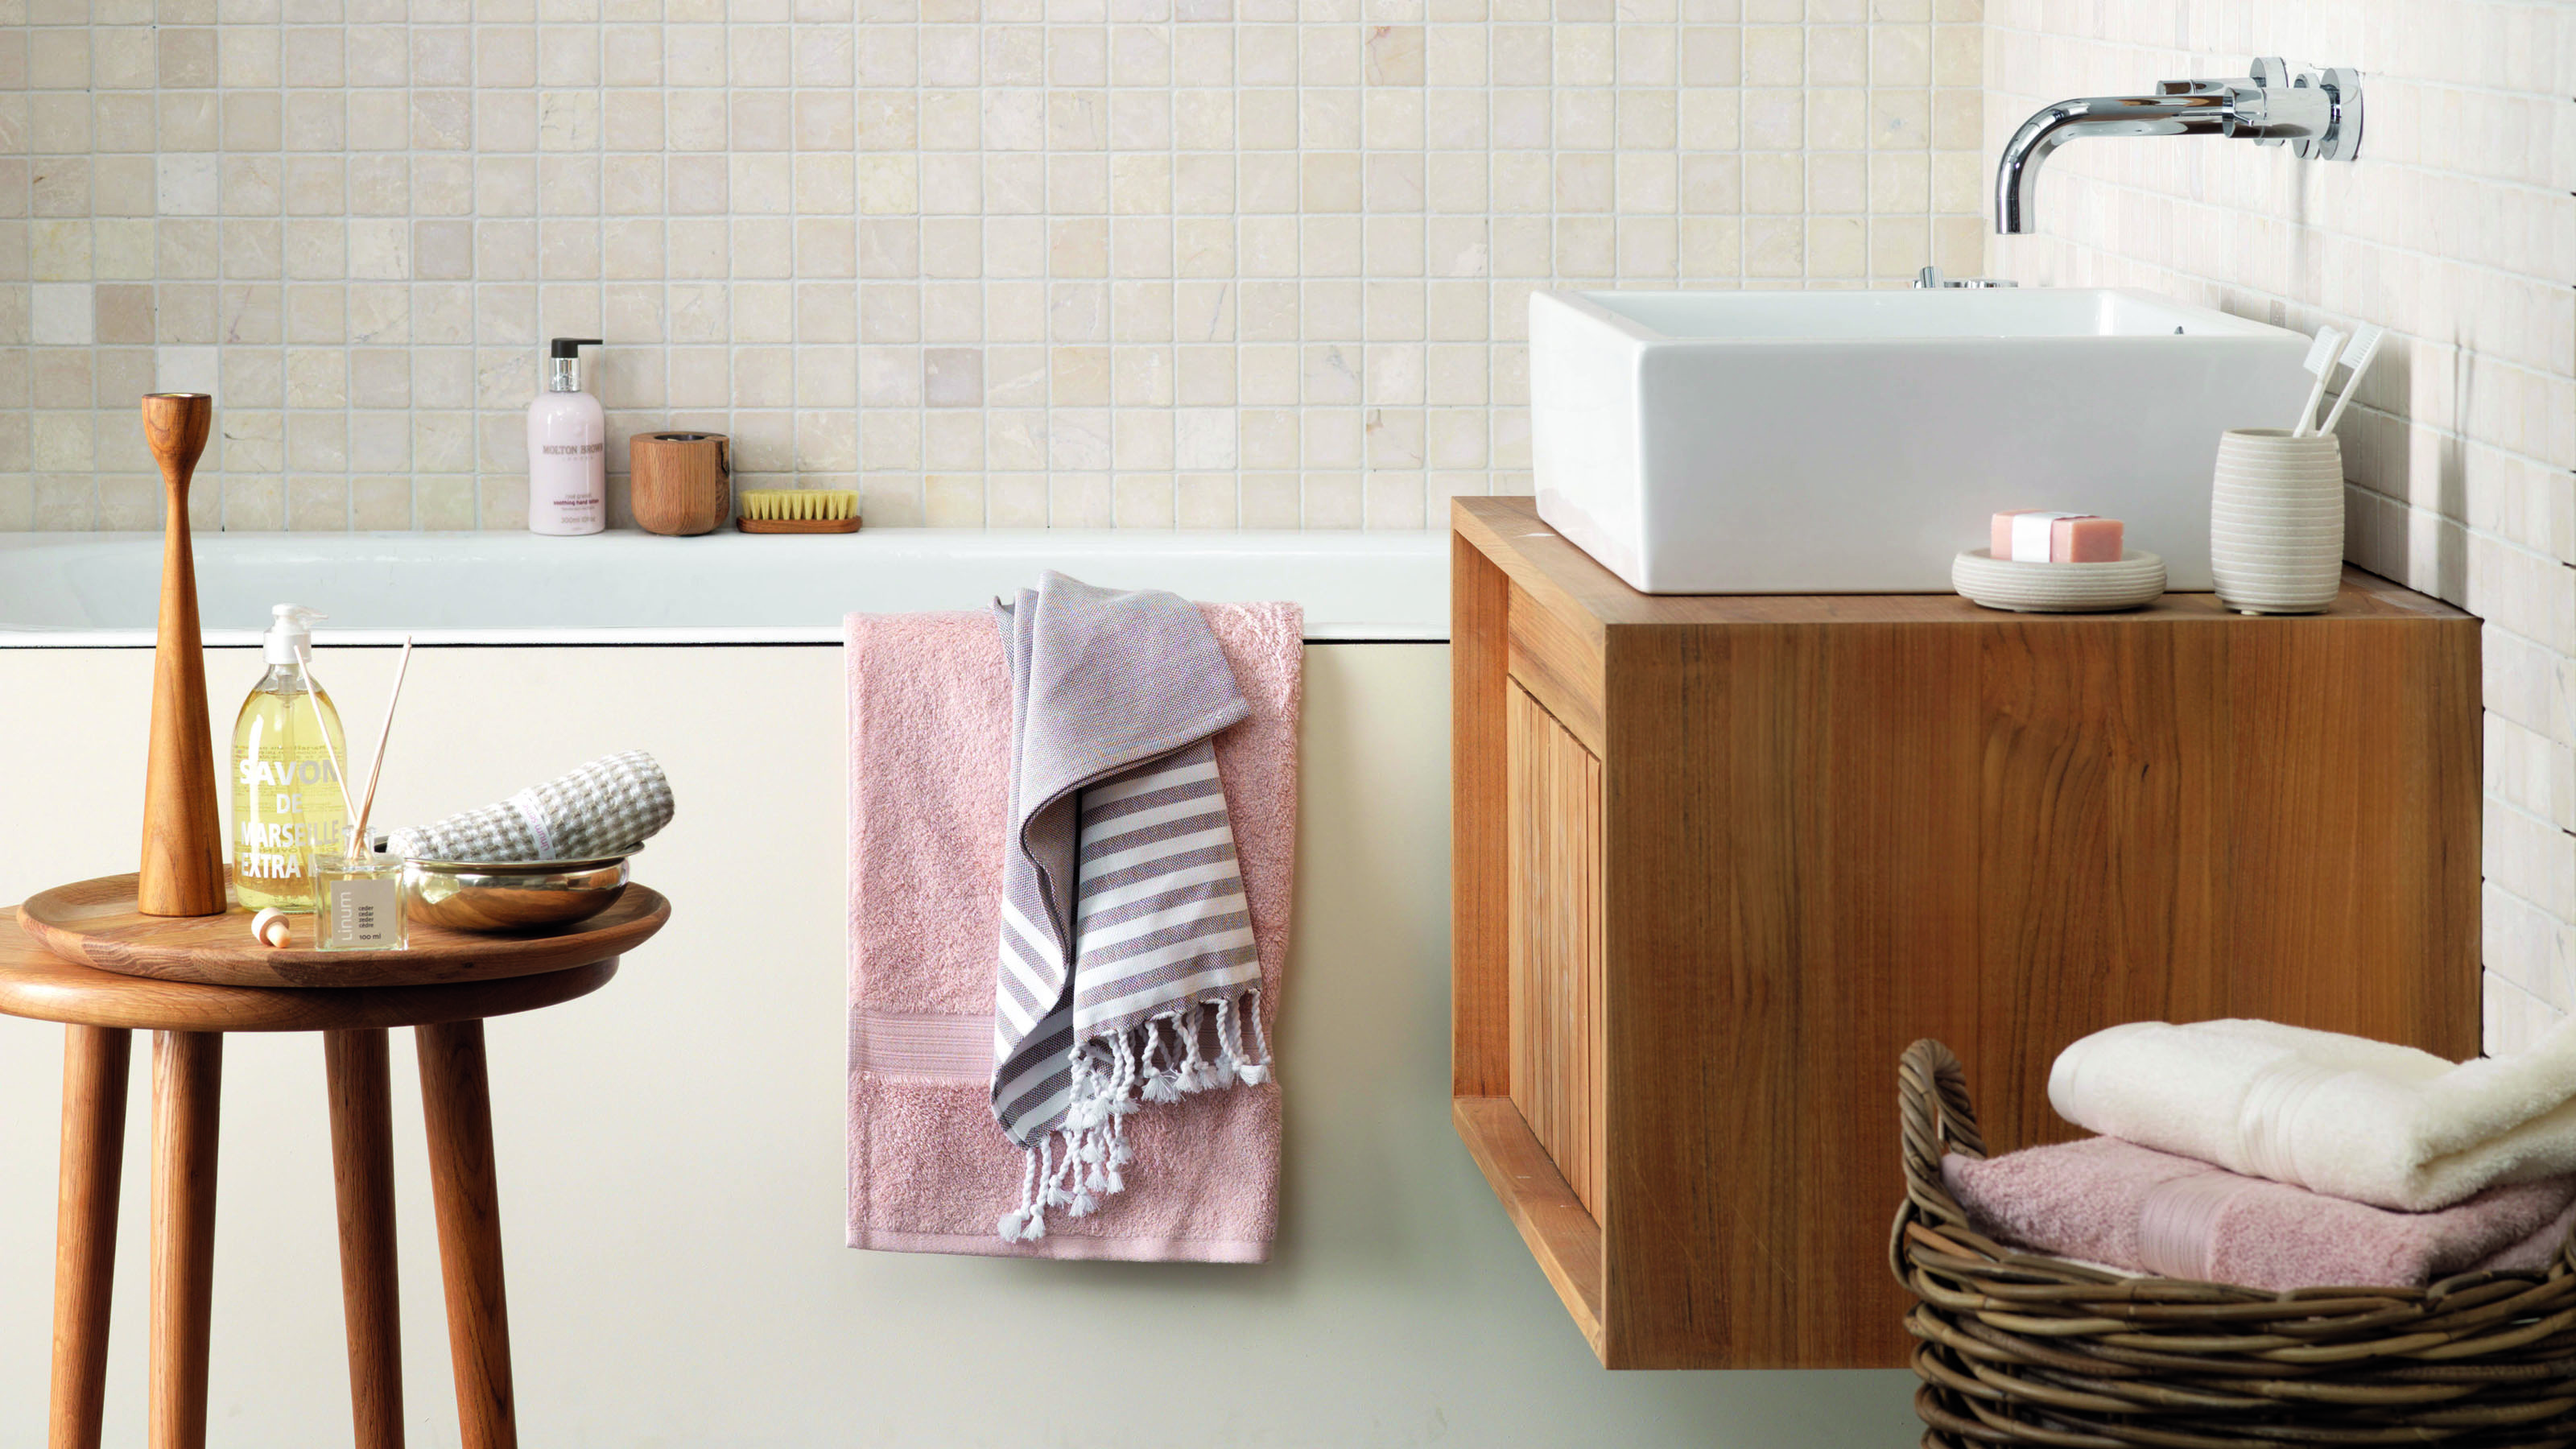 8 Clever Storage Ideas for Under the Bathroom Sink